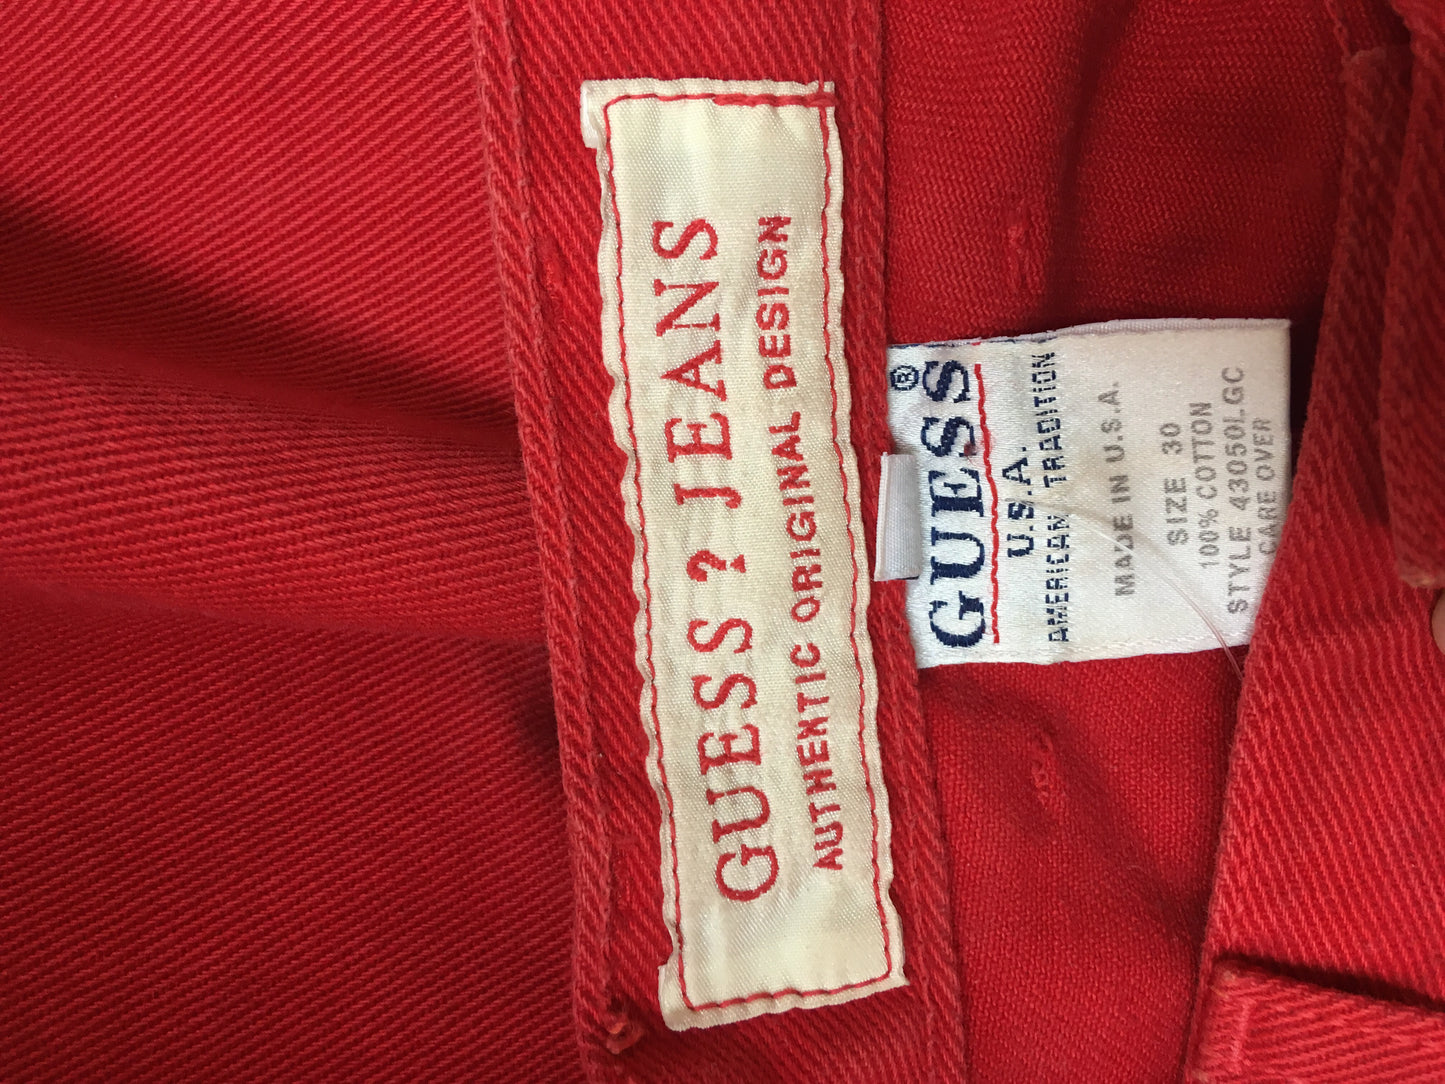 Guess Vintage Red Jeans